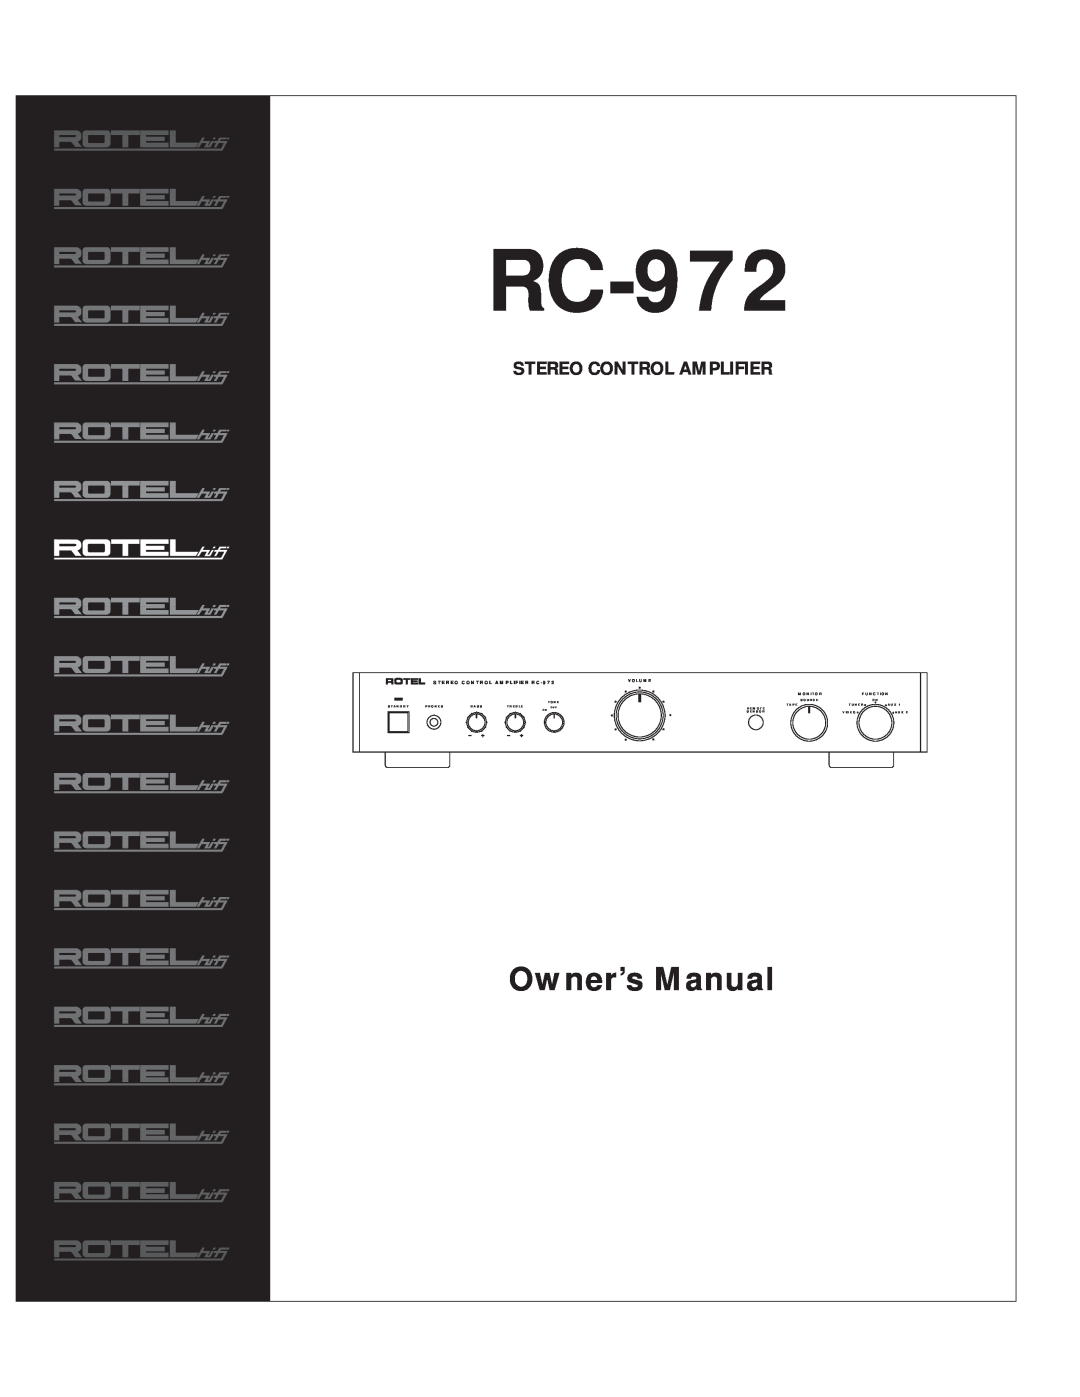 Rotel RC-972 owner manual Stereo Control Amplifier, Tone, Source, Standby, Phones, Bass, Treble, Tape, Tuner, Remote 